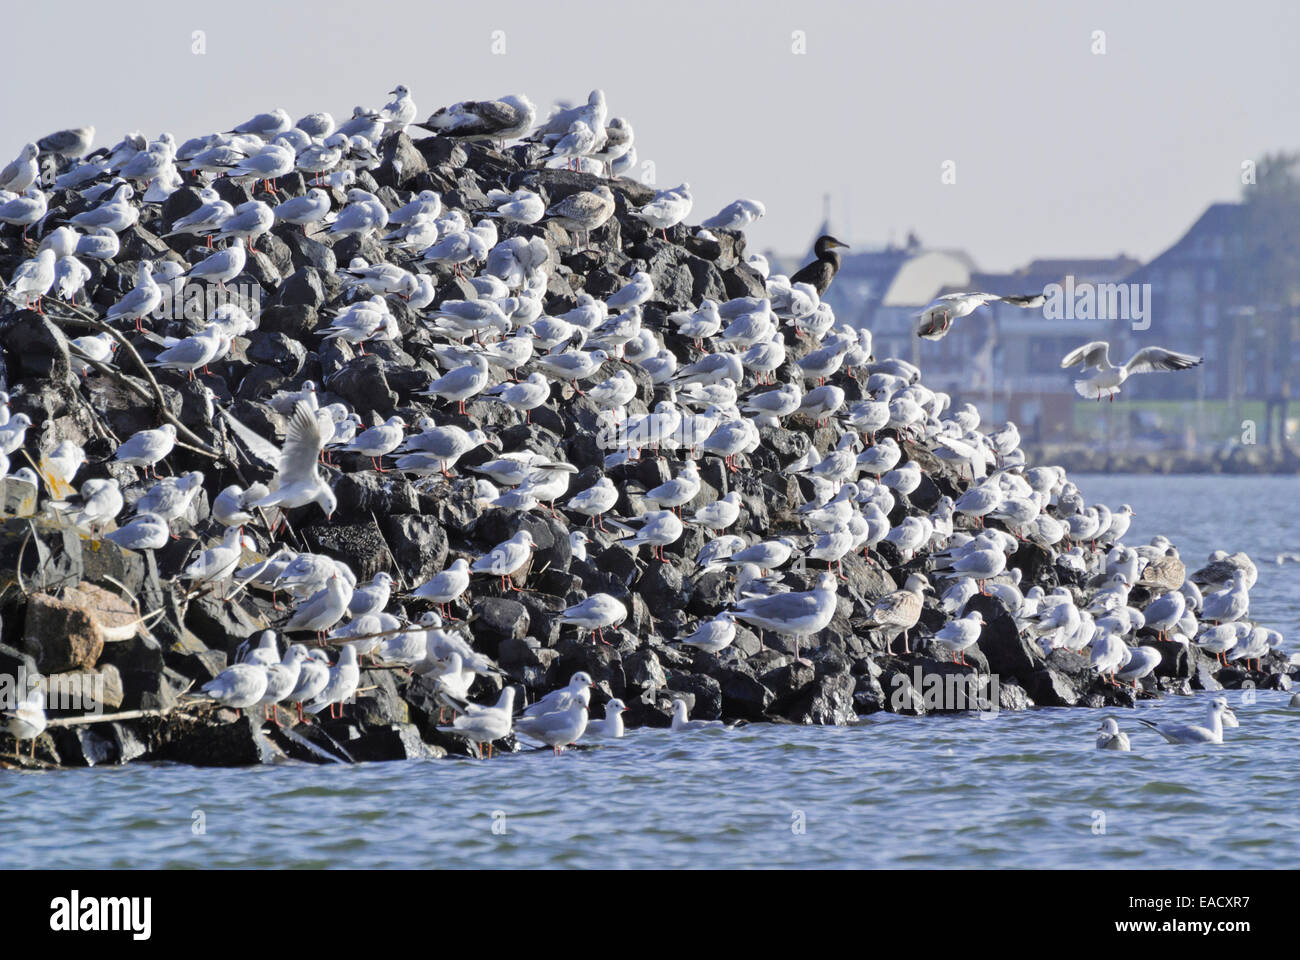 Great cormorants (Phalacrocorax carbo) and gulls (Larus) at Elbe River Mouth near Cuxhaven, Germany Stock Photo